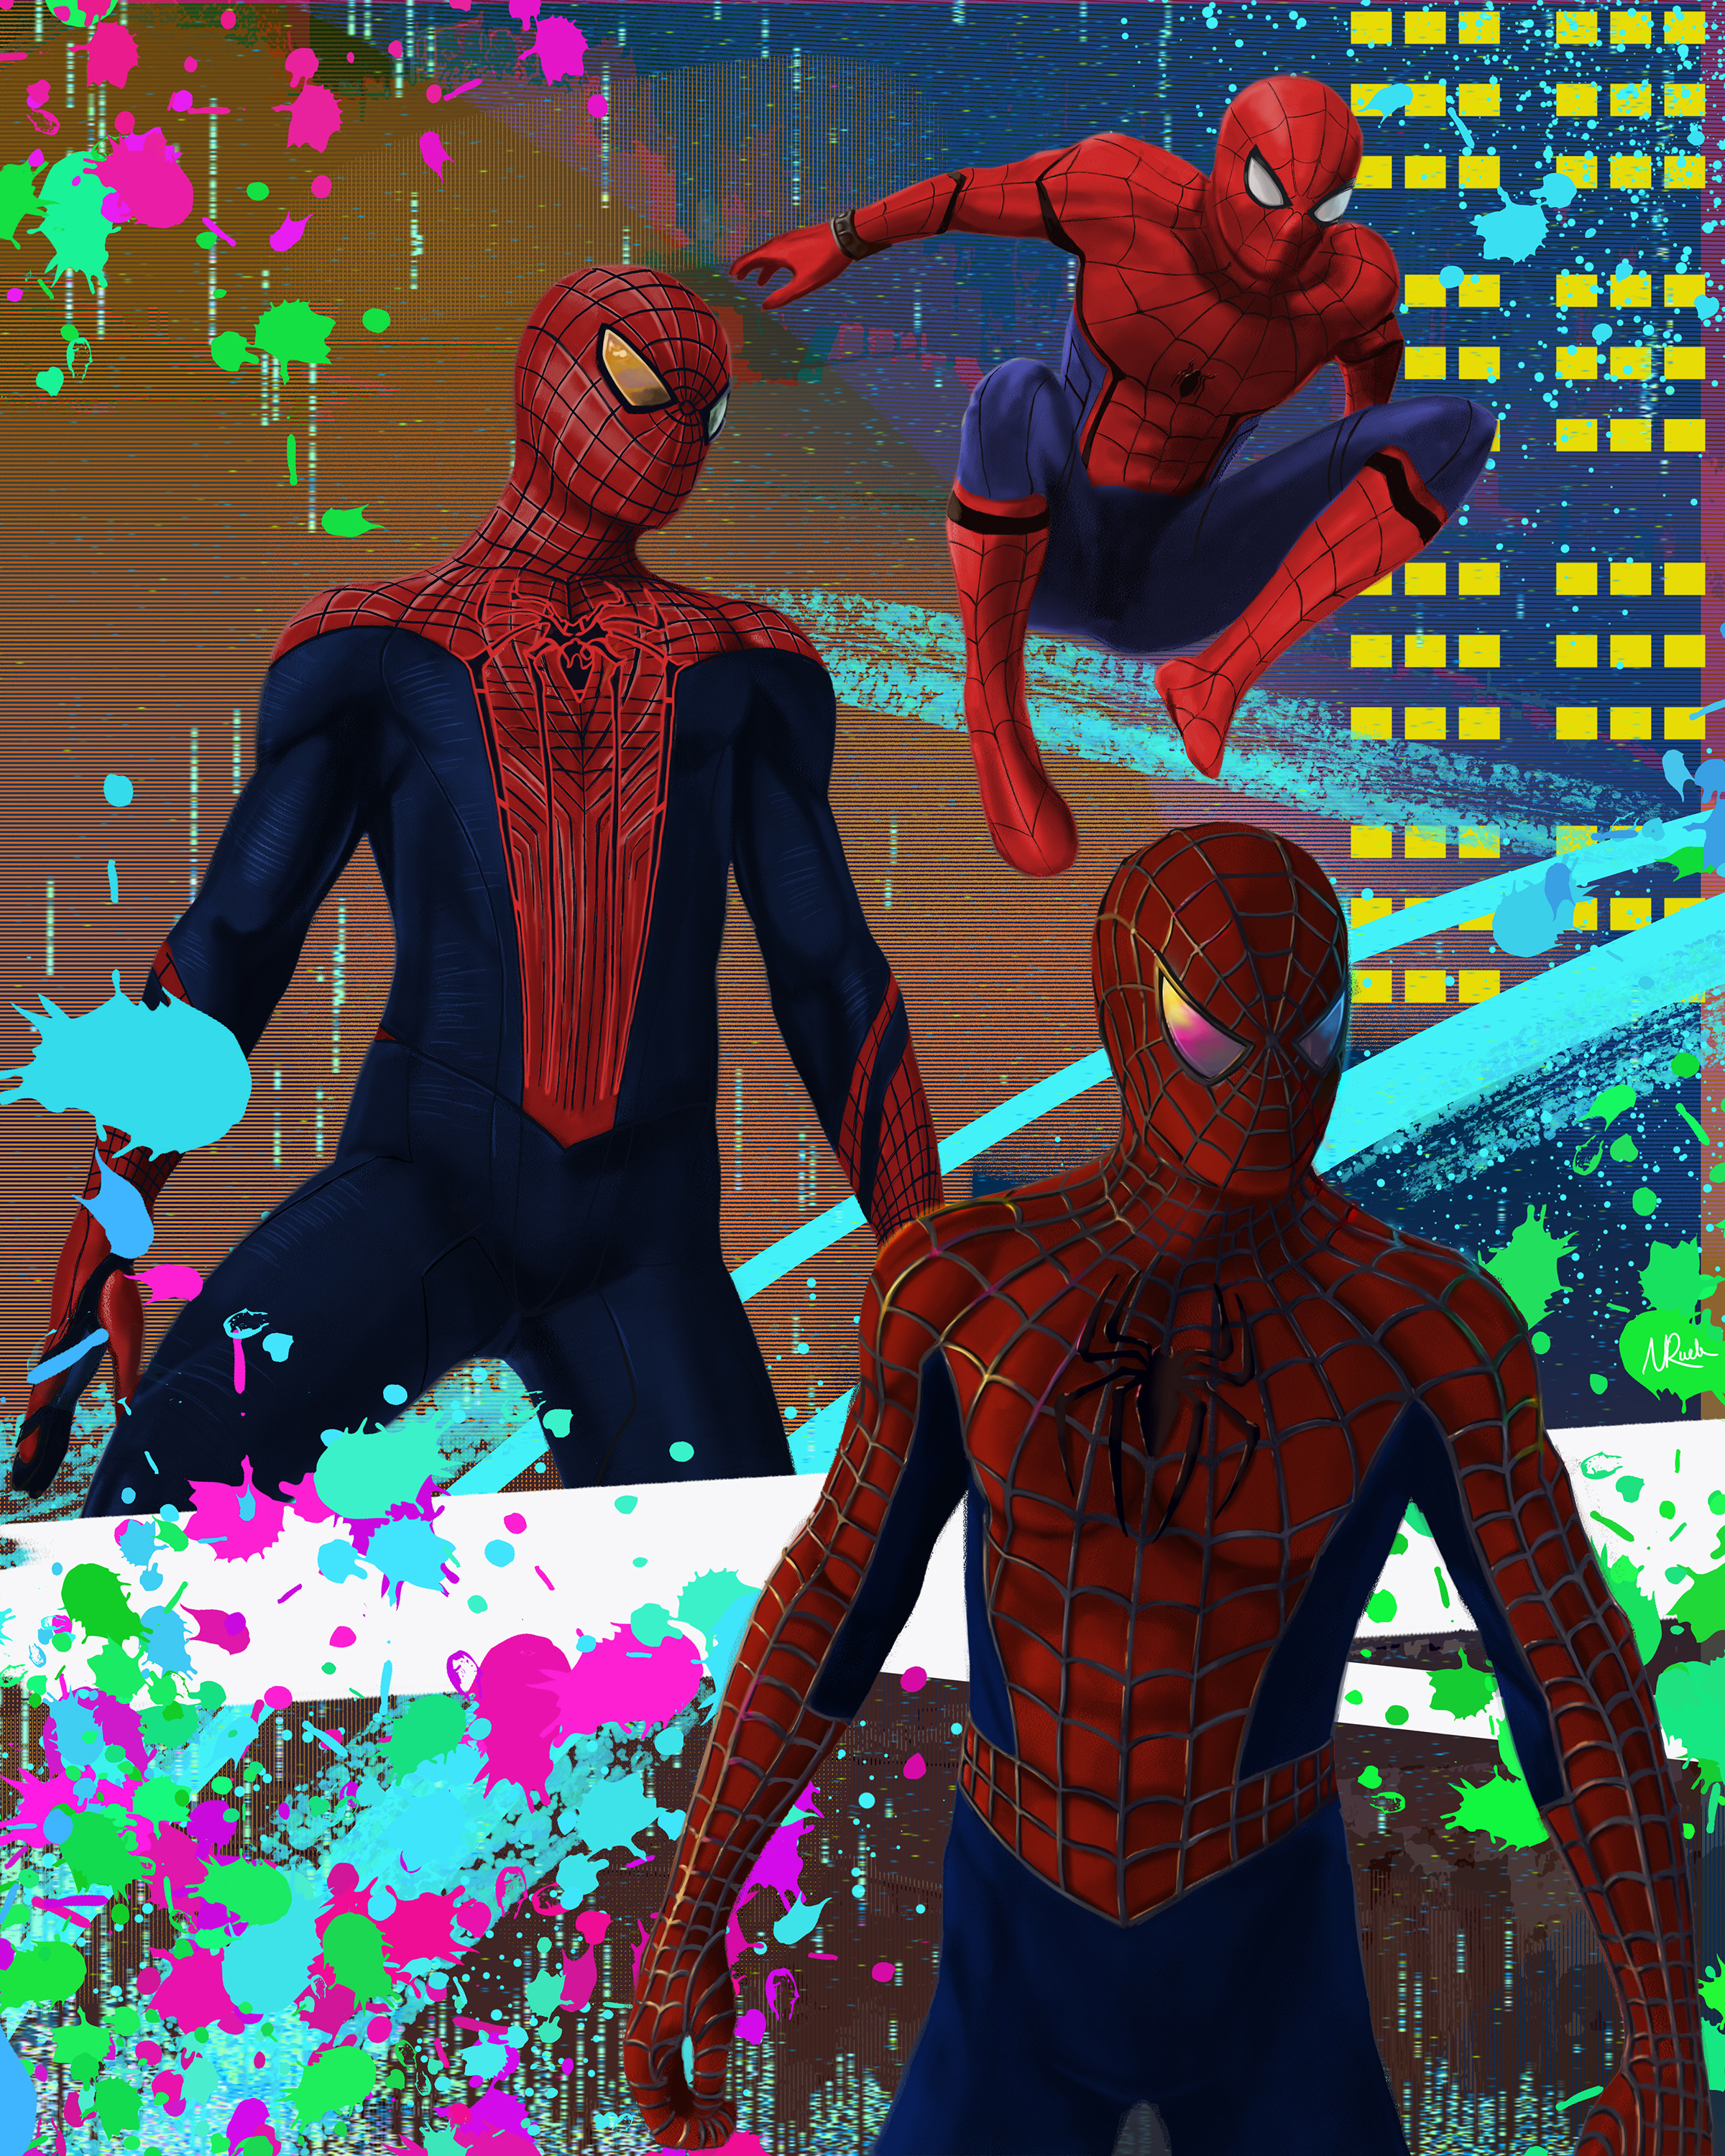 I didn't include Miles, so I decided to create a scene of the multiverse aesthetic from the Spiderverse movie